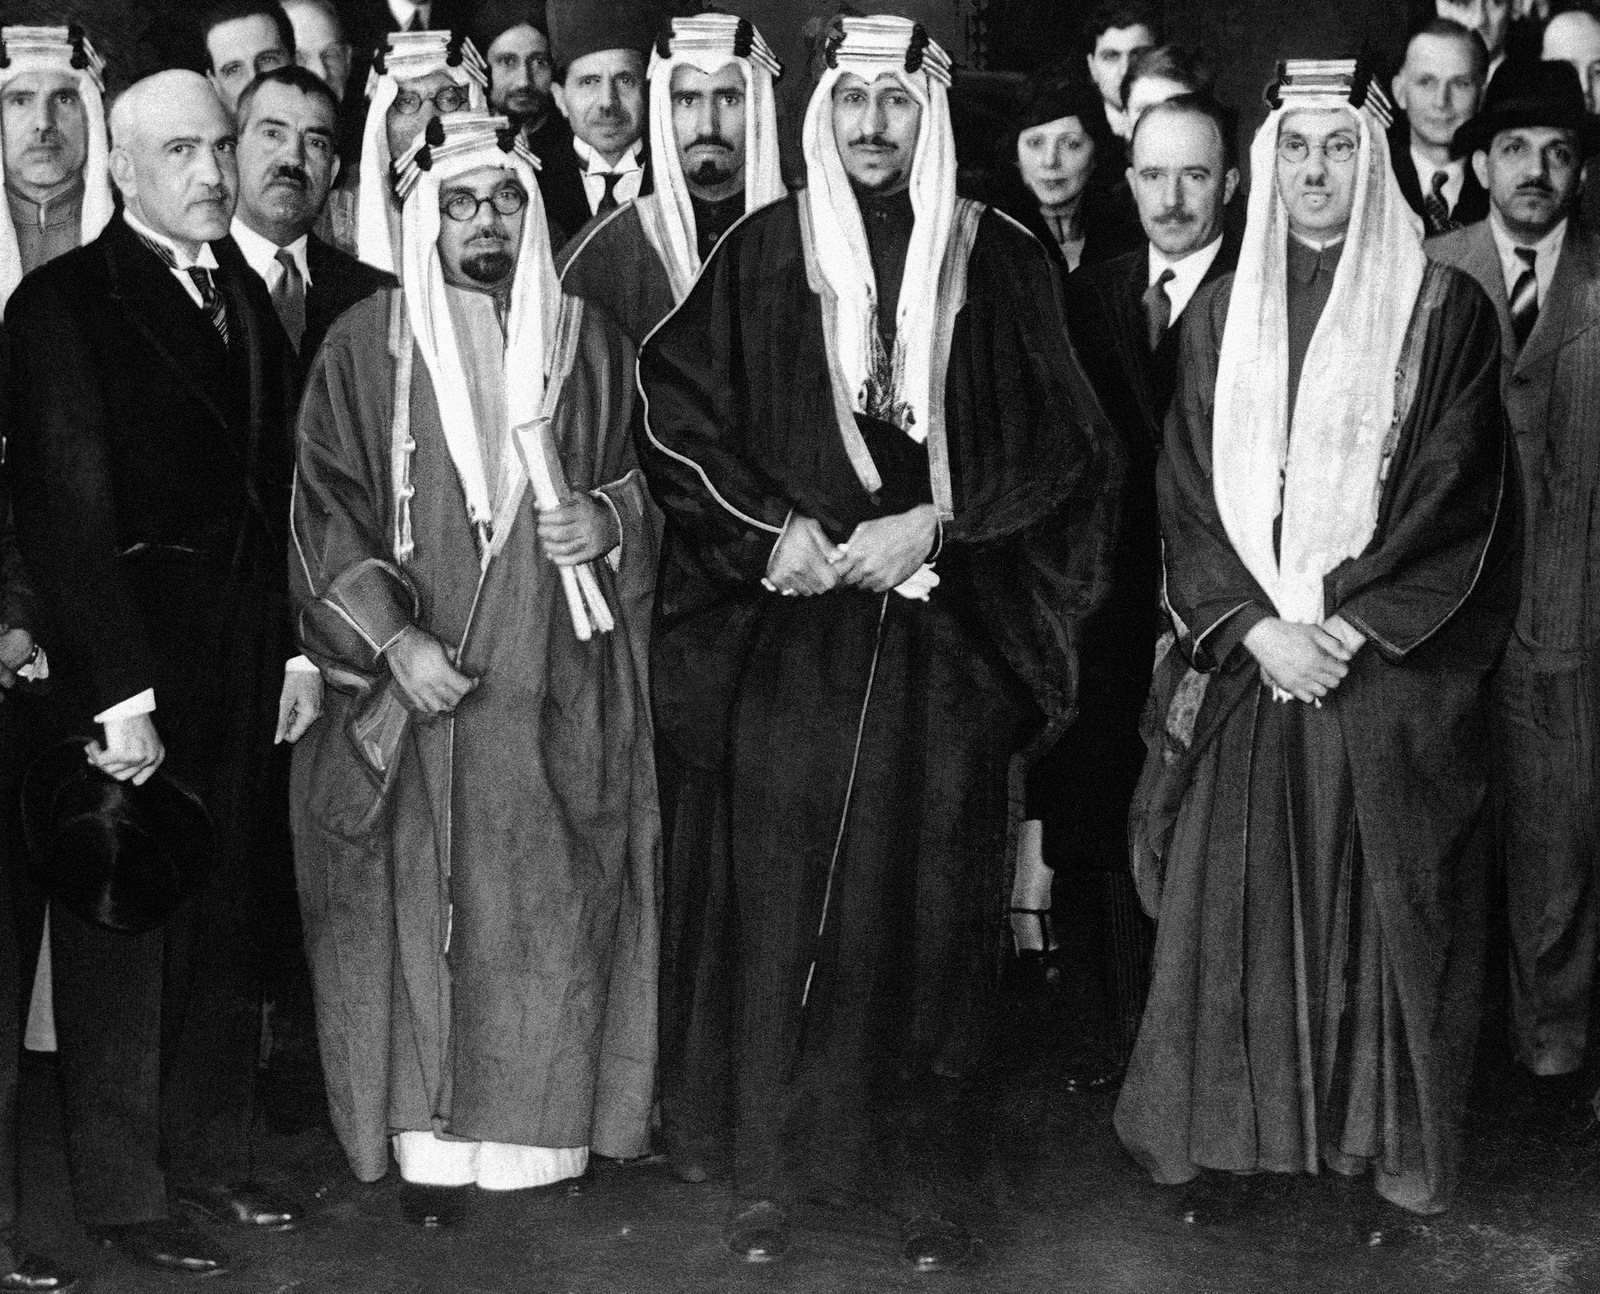 The Amir Saud, crown Prince of Saudi Arabia, and his younger brother, Mohamed, arrived in London , England, on May 7, 1937 for the coronation. H.R.H. the Amid Saud, crown Prince of Saudi Arabia, with the Saud Arabian delegation, on arrival at Victoria Station in London on May 7, 1937. (AP Photo)